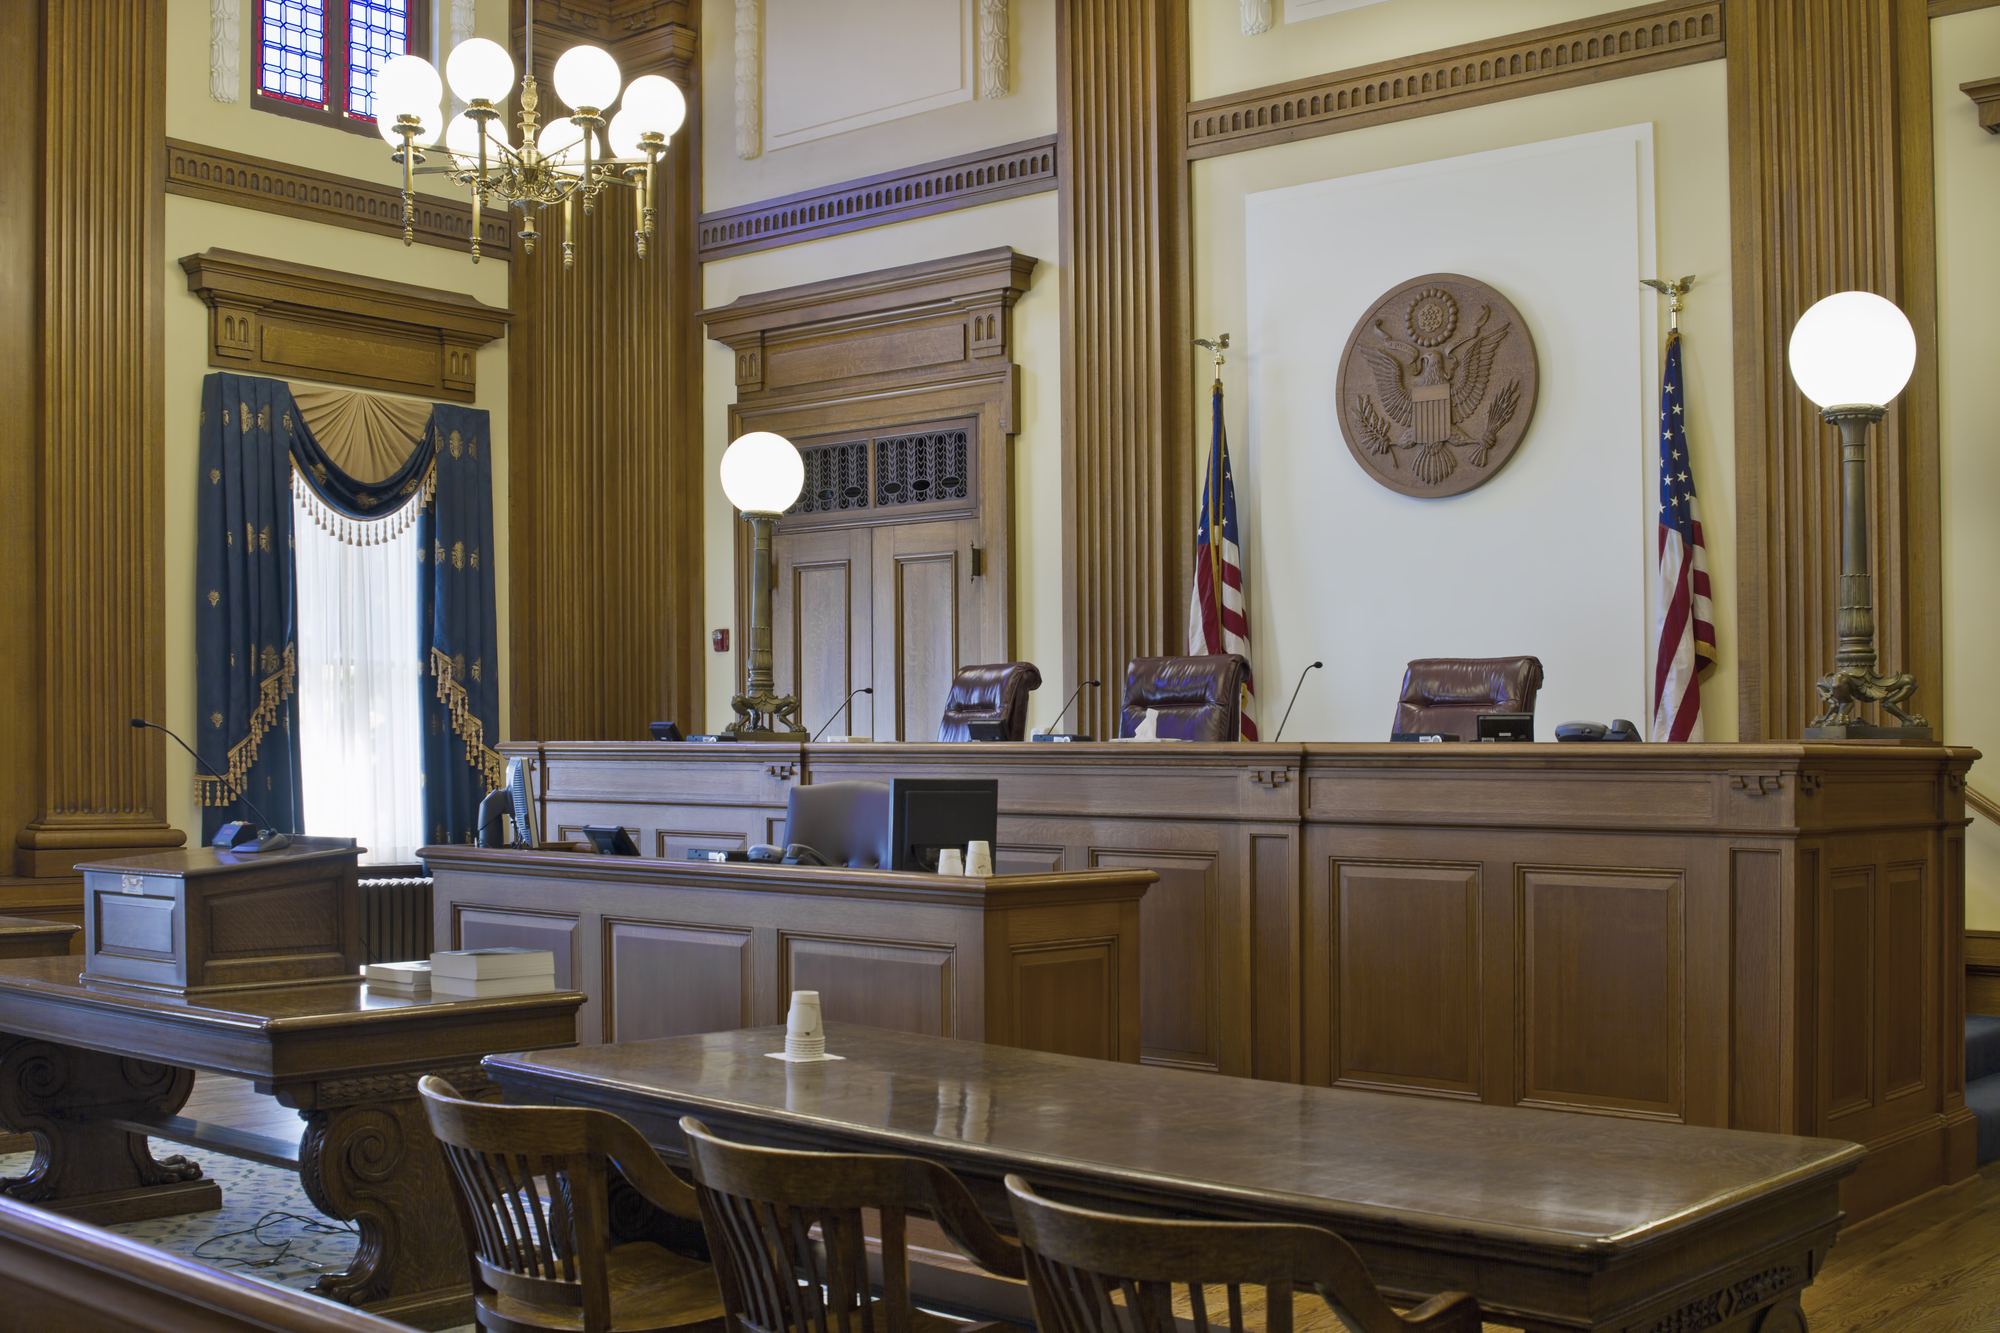 Court of Appeals Courtroom in Pioneer Courthouse